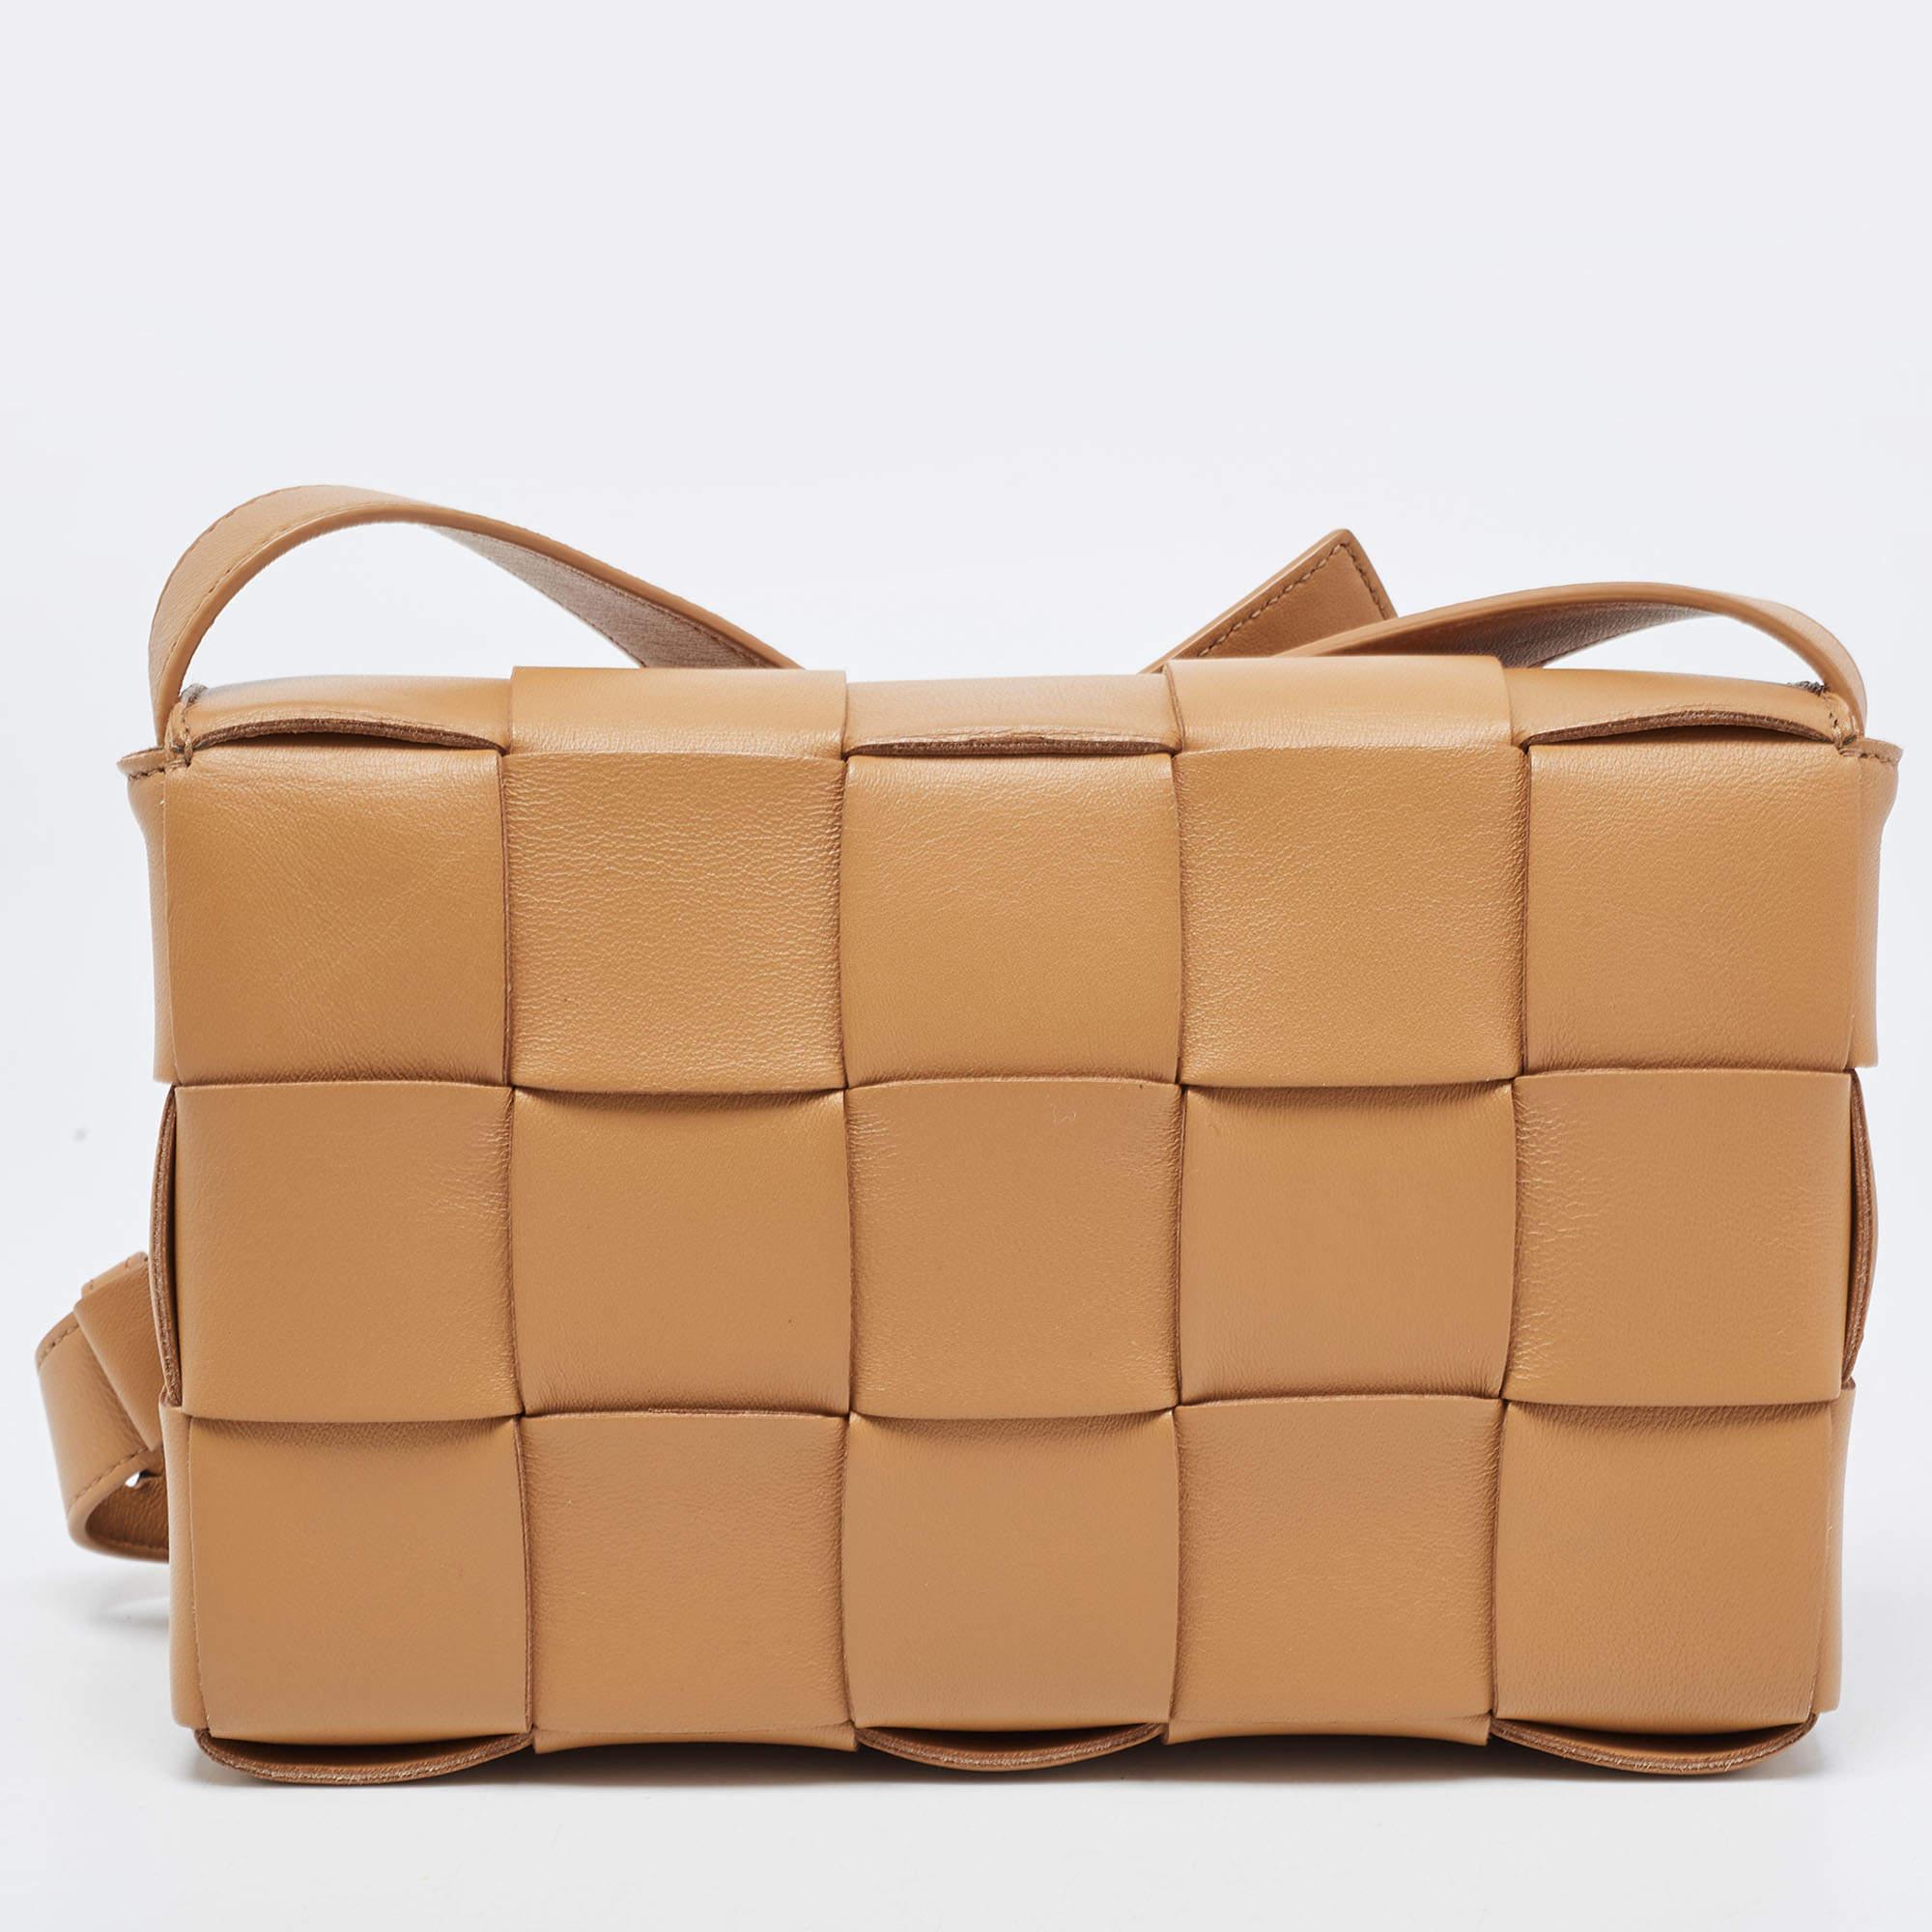 The Cassette bag by Bottega Veneta is all things stylish, trendy, and Instagrammable. With its playful take on the brand's signature house code - the Intrecciato weave, the bag's exterior flaunts a maxi version of the weave. It is crafted from